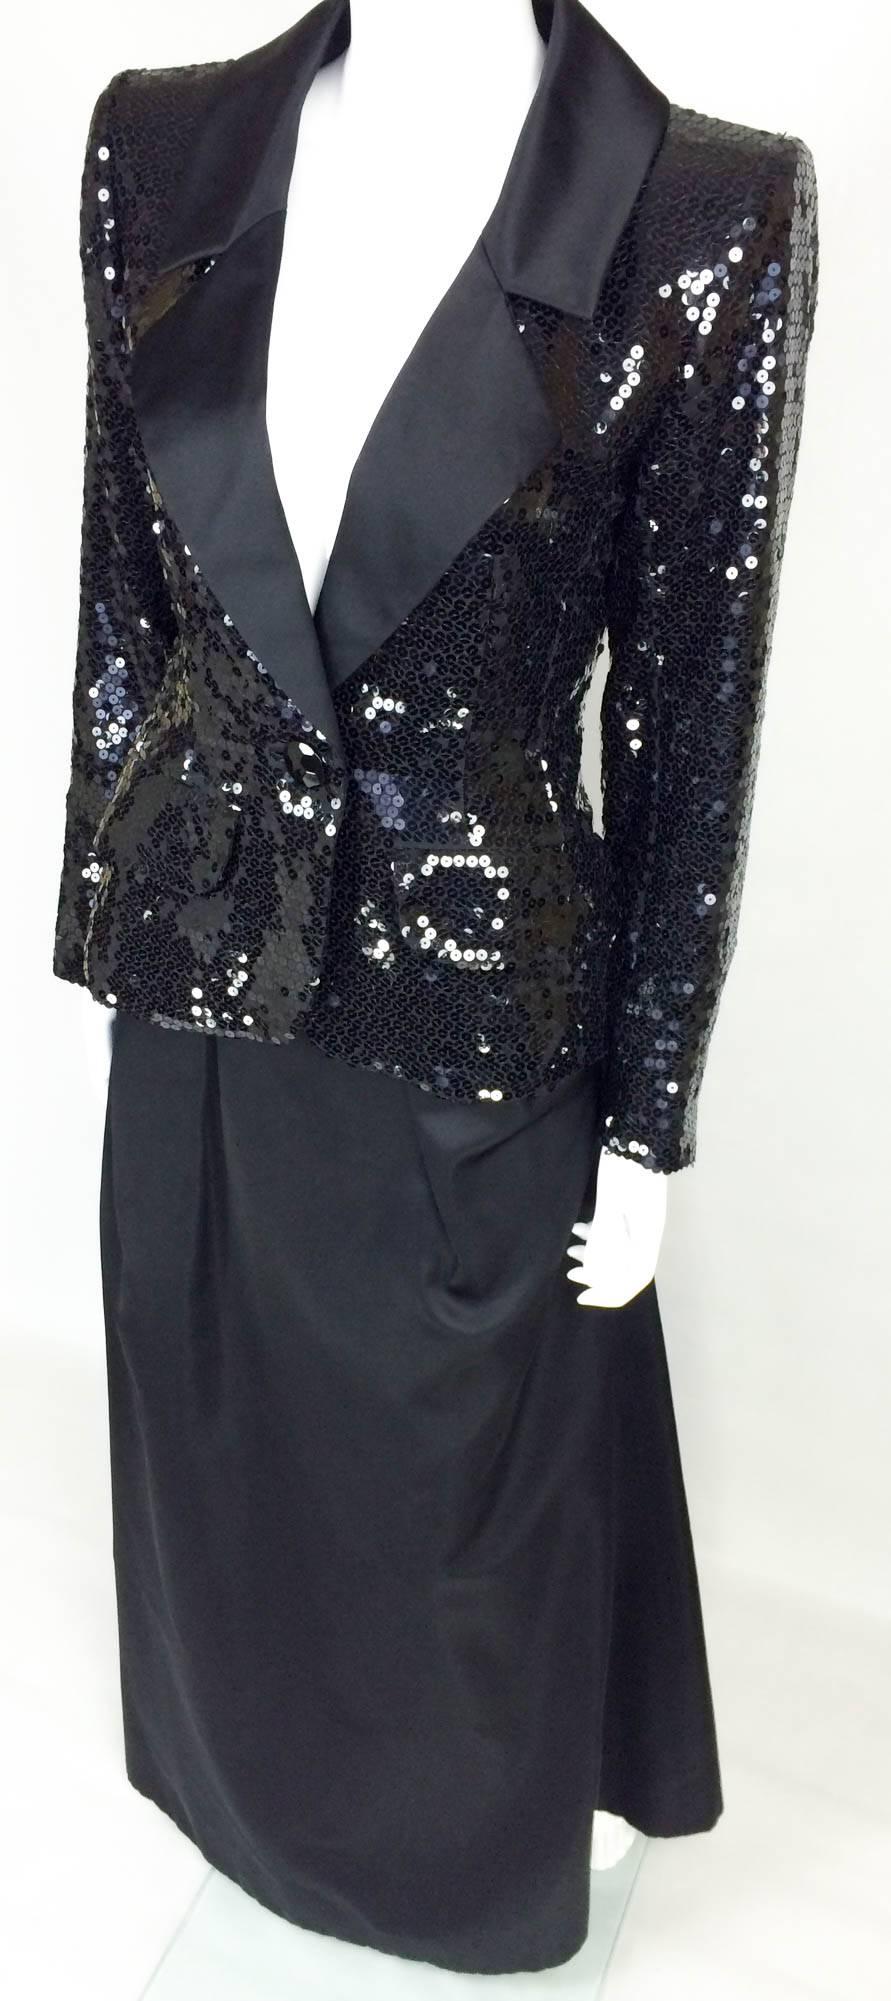 Black Yves Saint Laurent Le Smoking Sequin Jacket, Long and Short Satin Skirts - 1980 For Sale